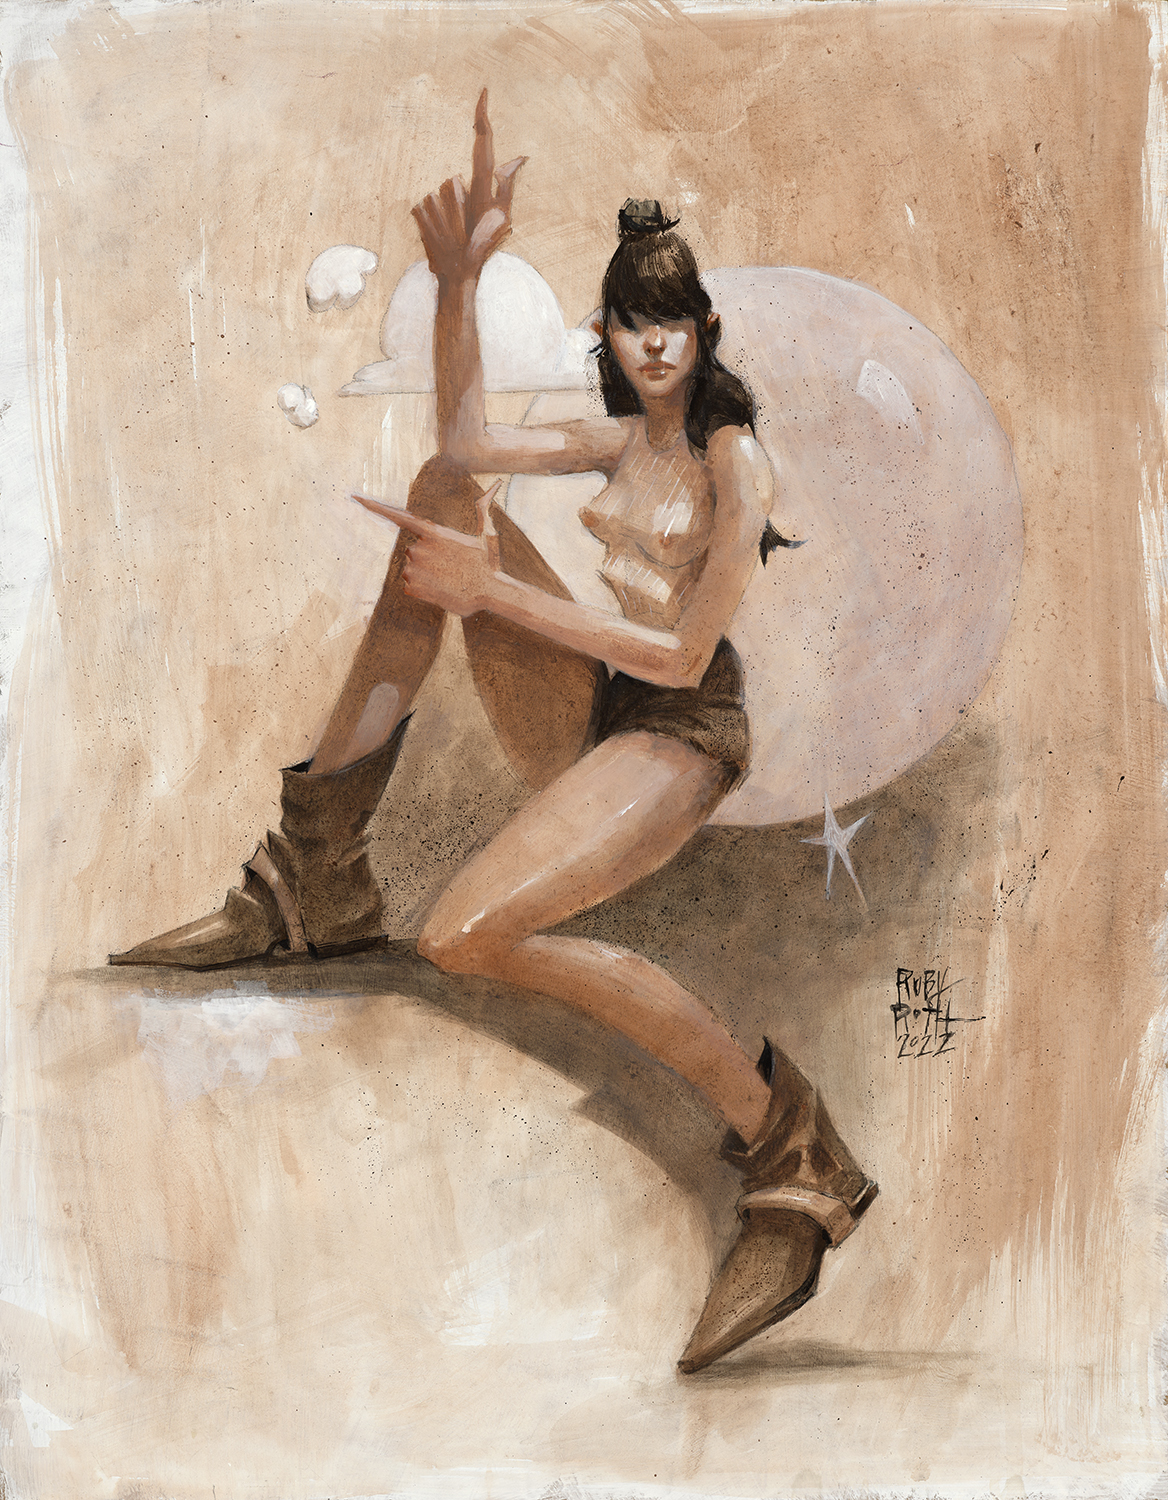 painting by ruby roselani roth of a topless cowgirl on a hill brown and sepia tones